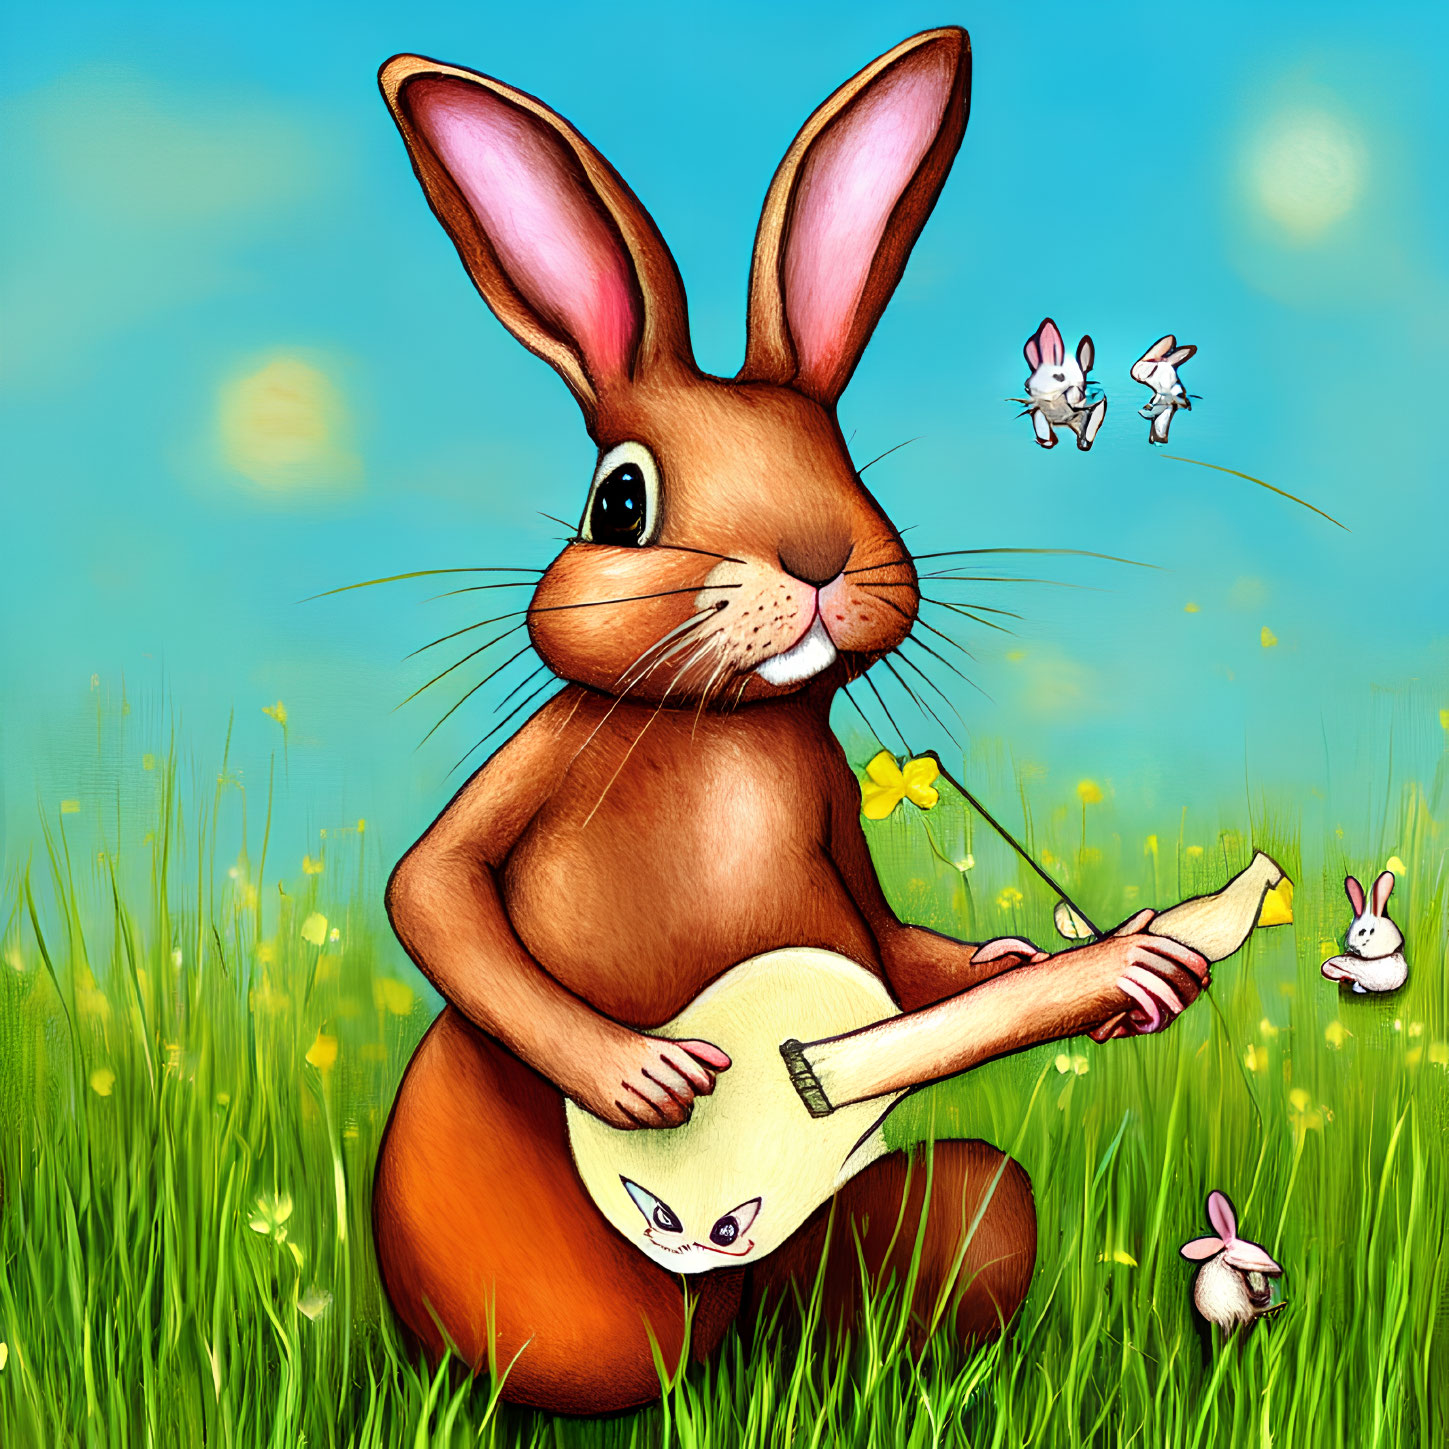 Illustration of large brown rabbit playing yellow guitar in green field with dancing white rabbits